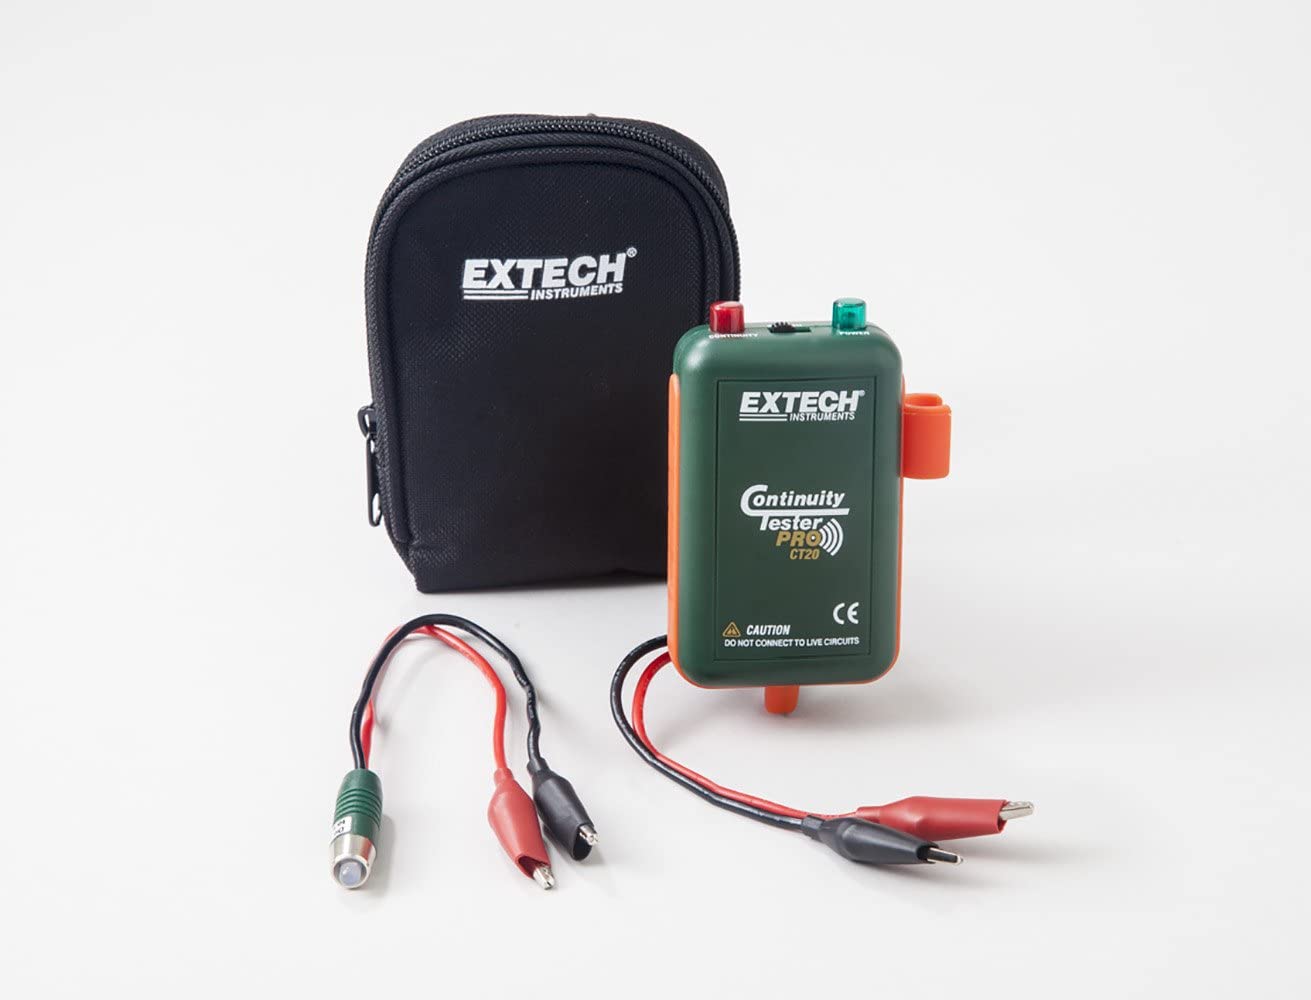 Extech Ct20 review